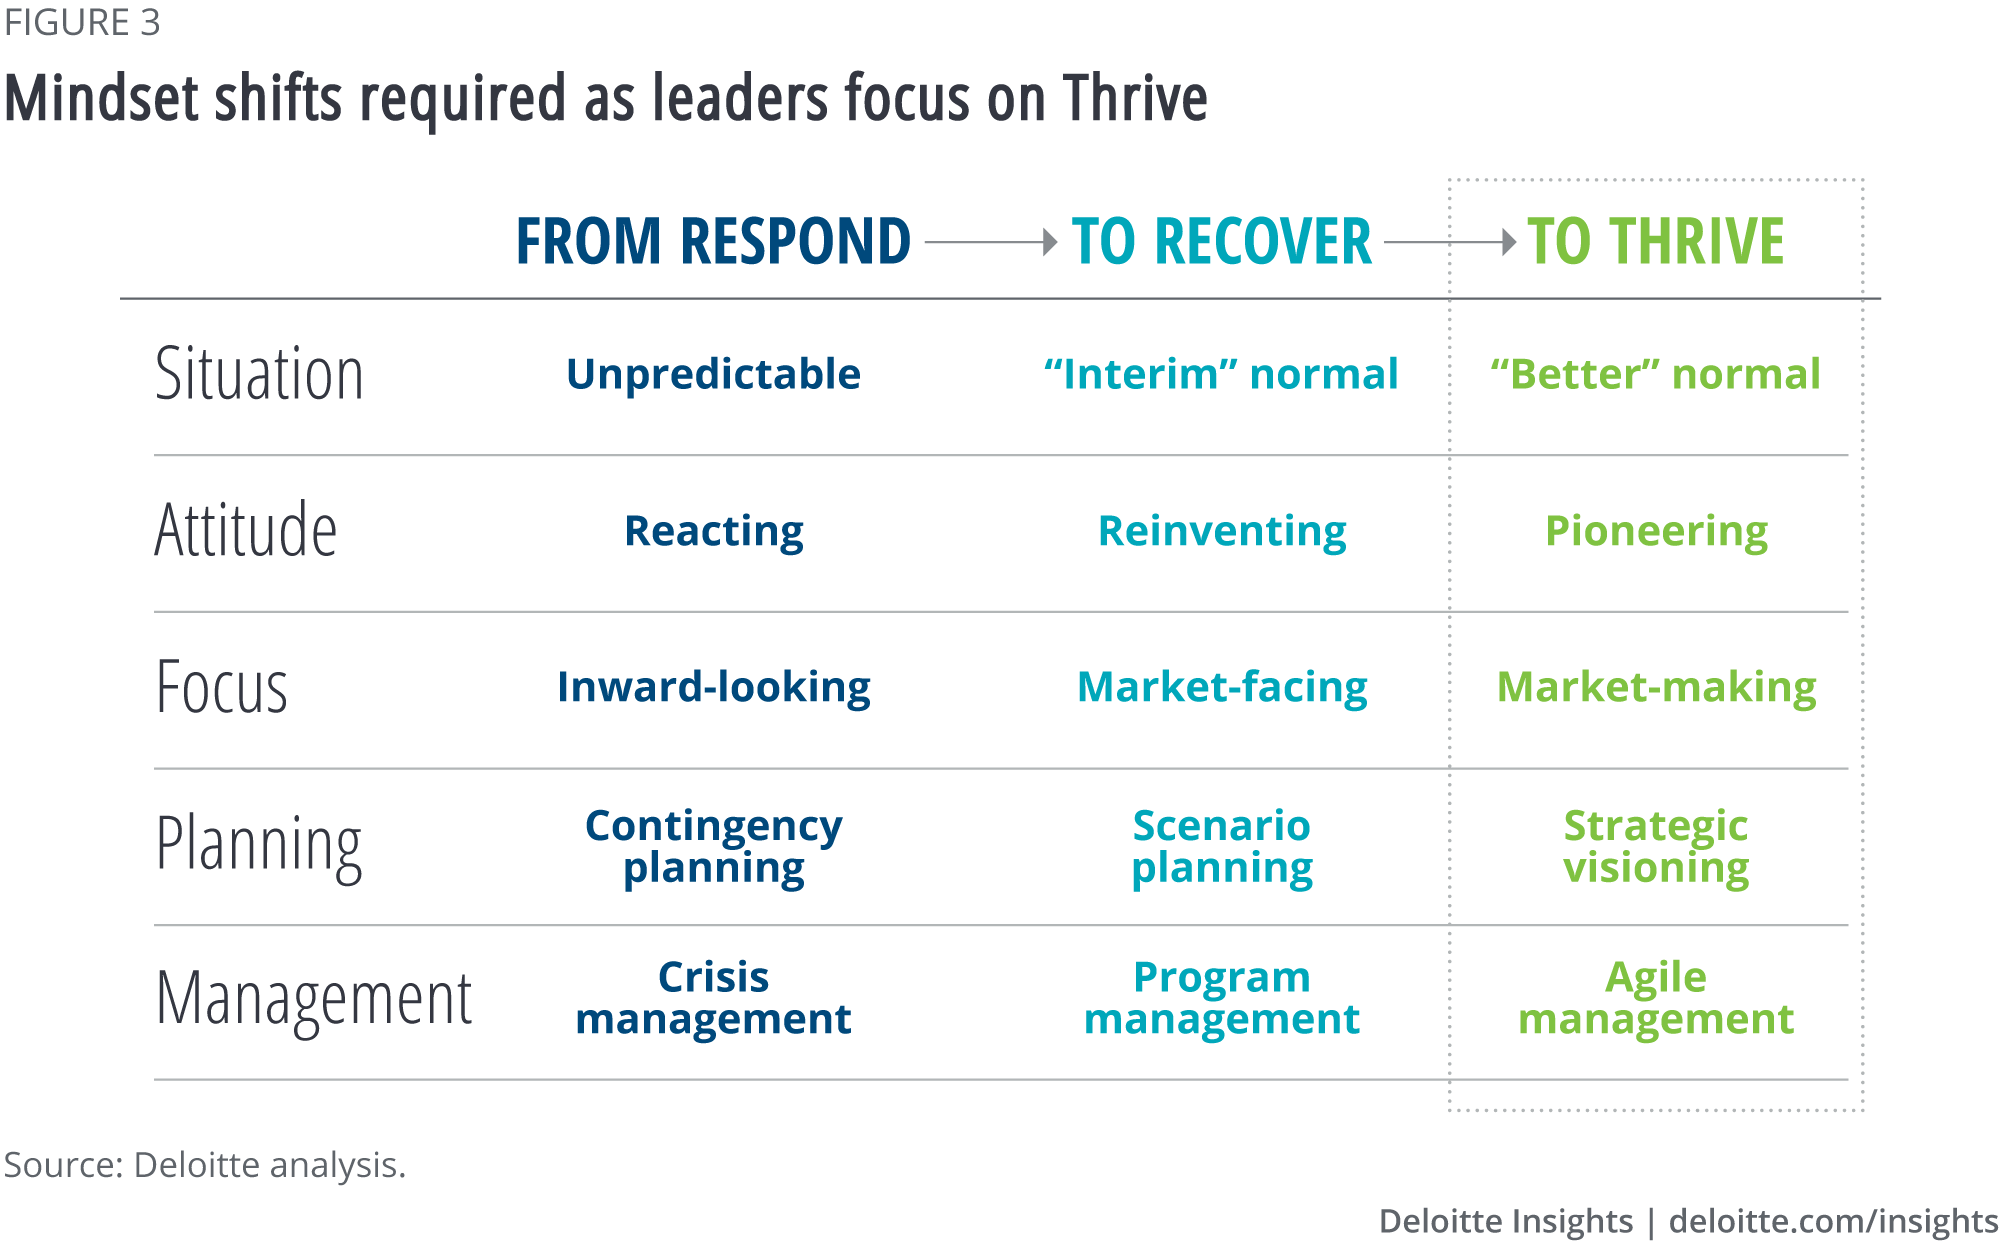 Mindset shifts as leaders focus on Thrive